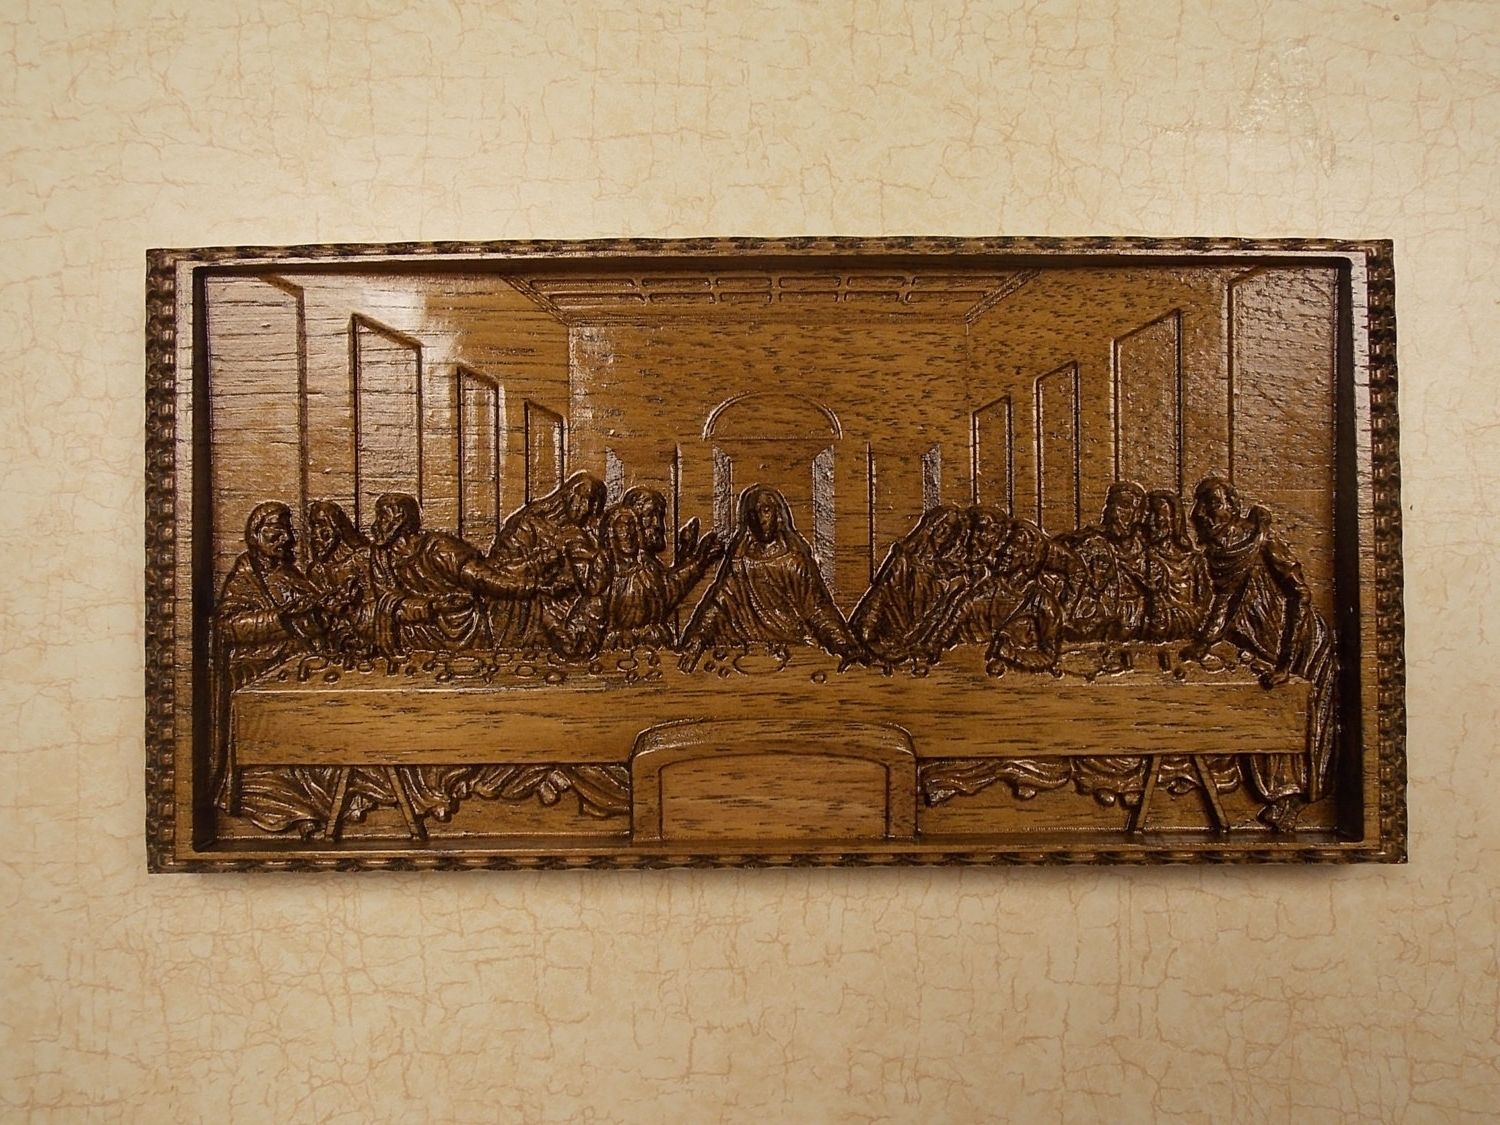 Well Known Last Supper Wall Art With Leonardo Da Vinci, The Last Supper Wall Decor, 3d Wood Carving (View 3 of 15)